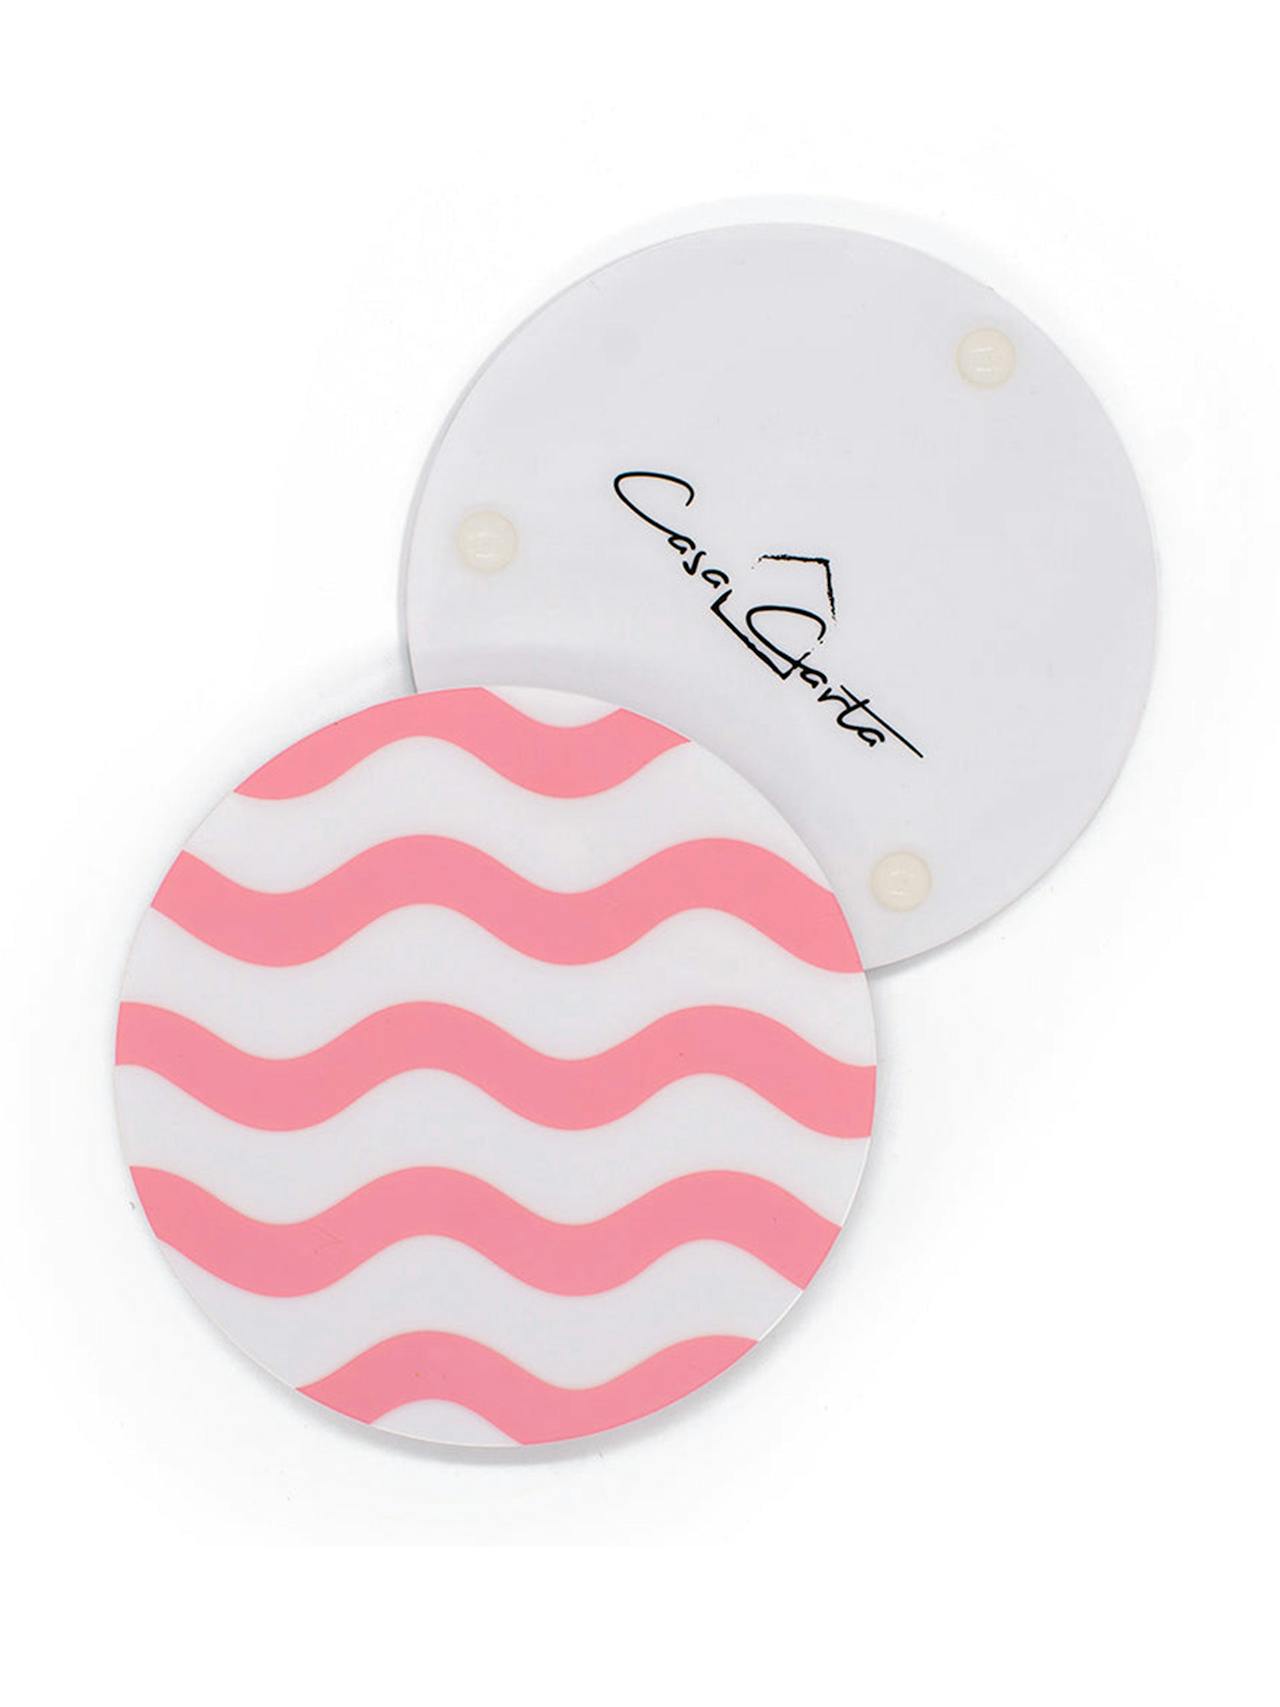 Set of 4 pink and white round coasters